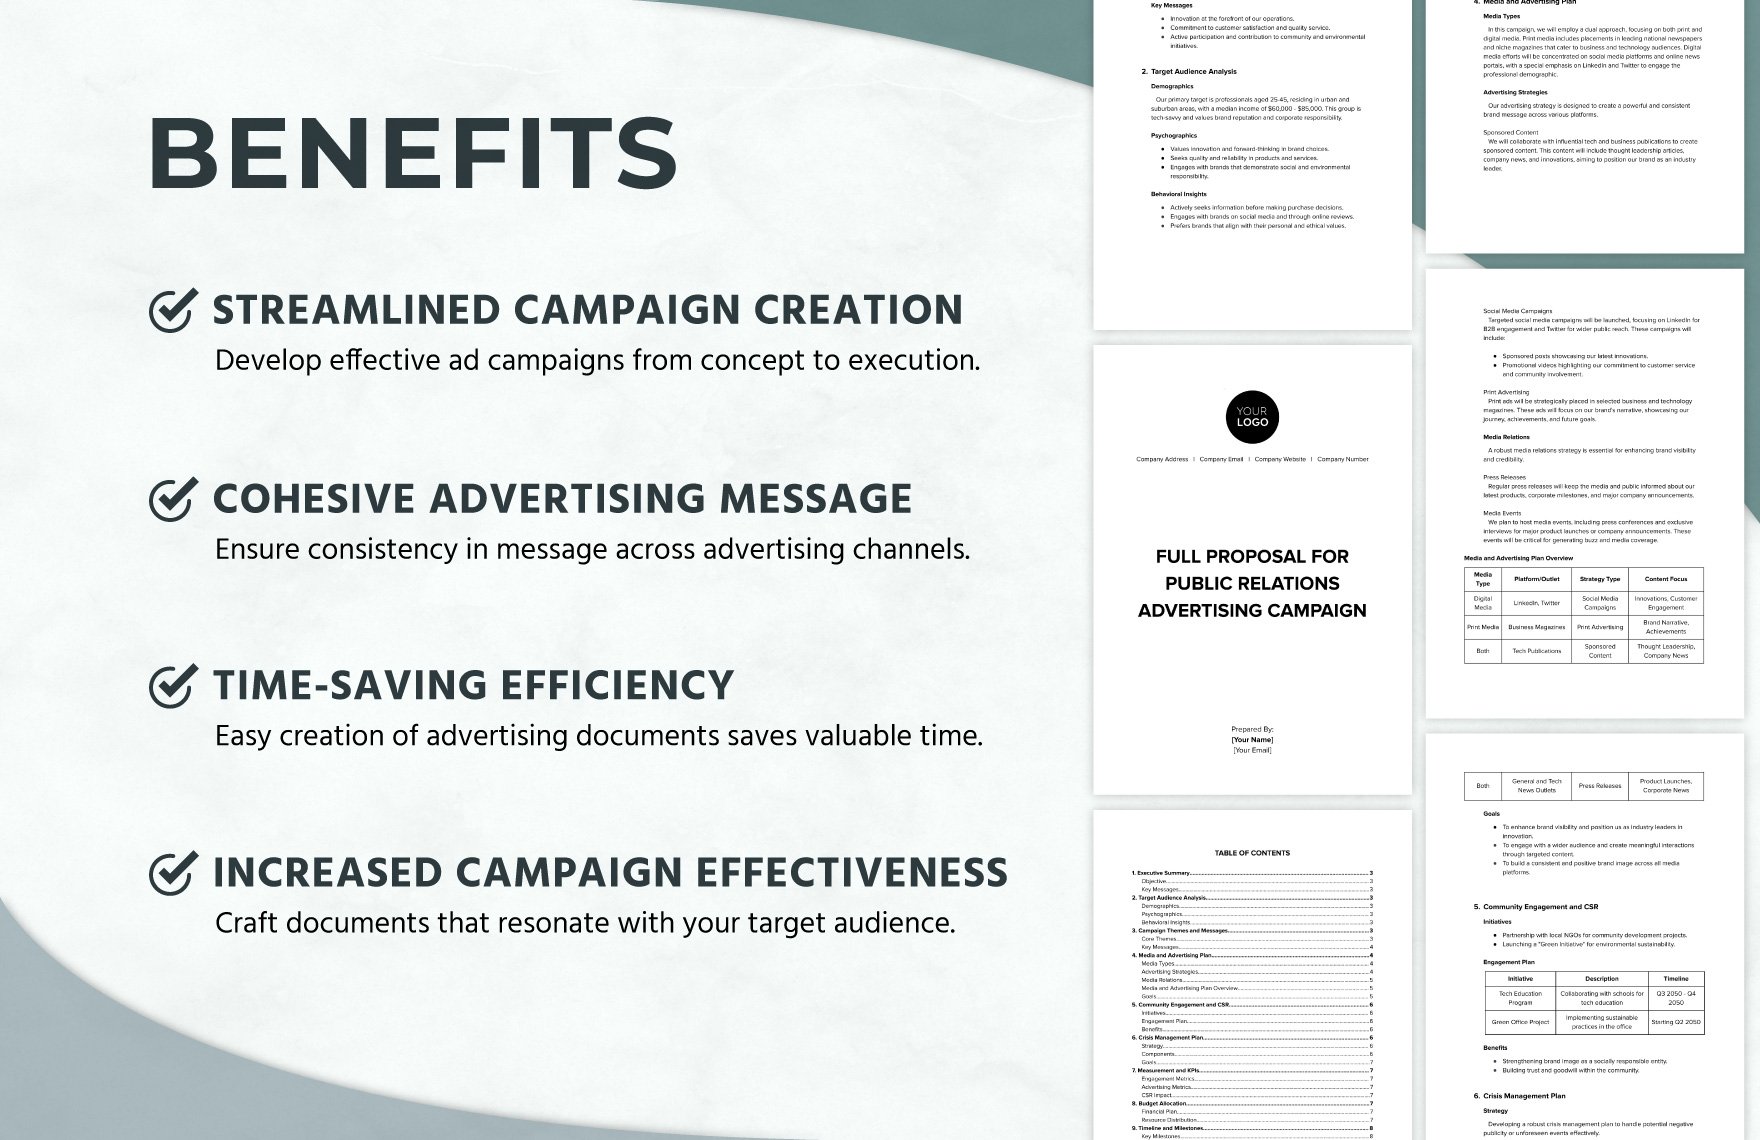 Full Proposal for Public Relations Advertising Campaign Template